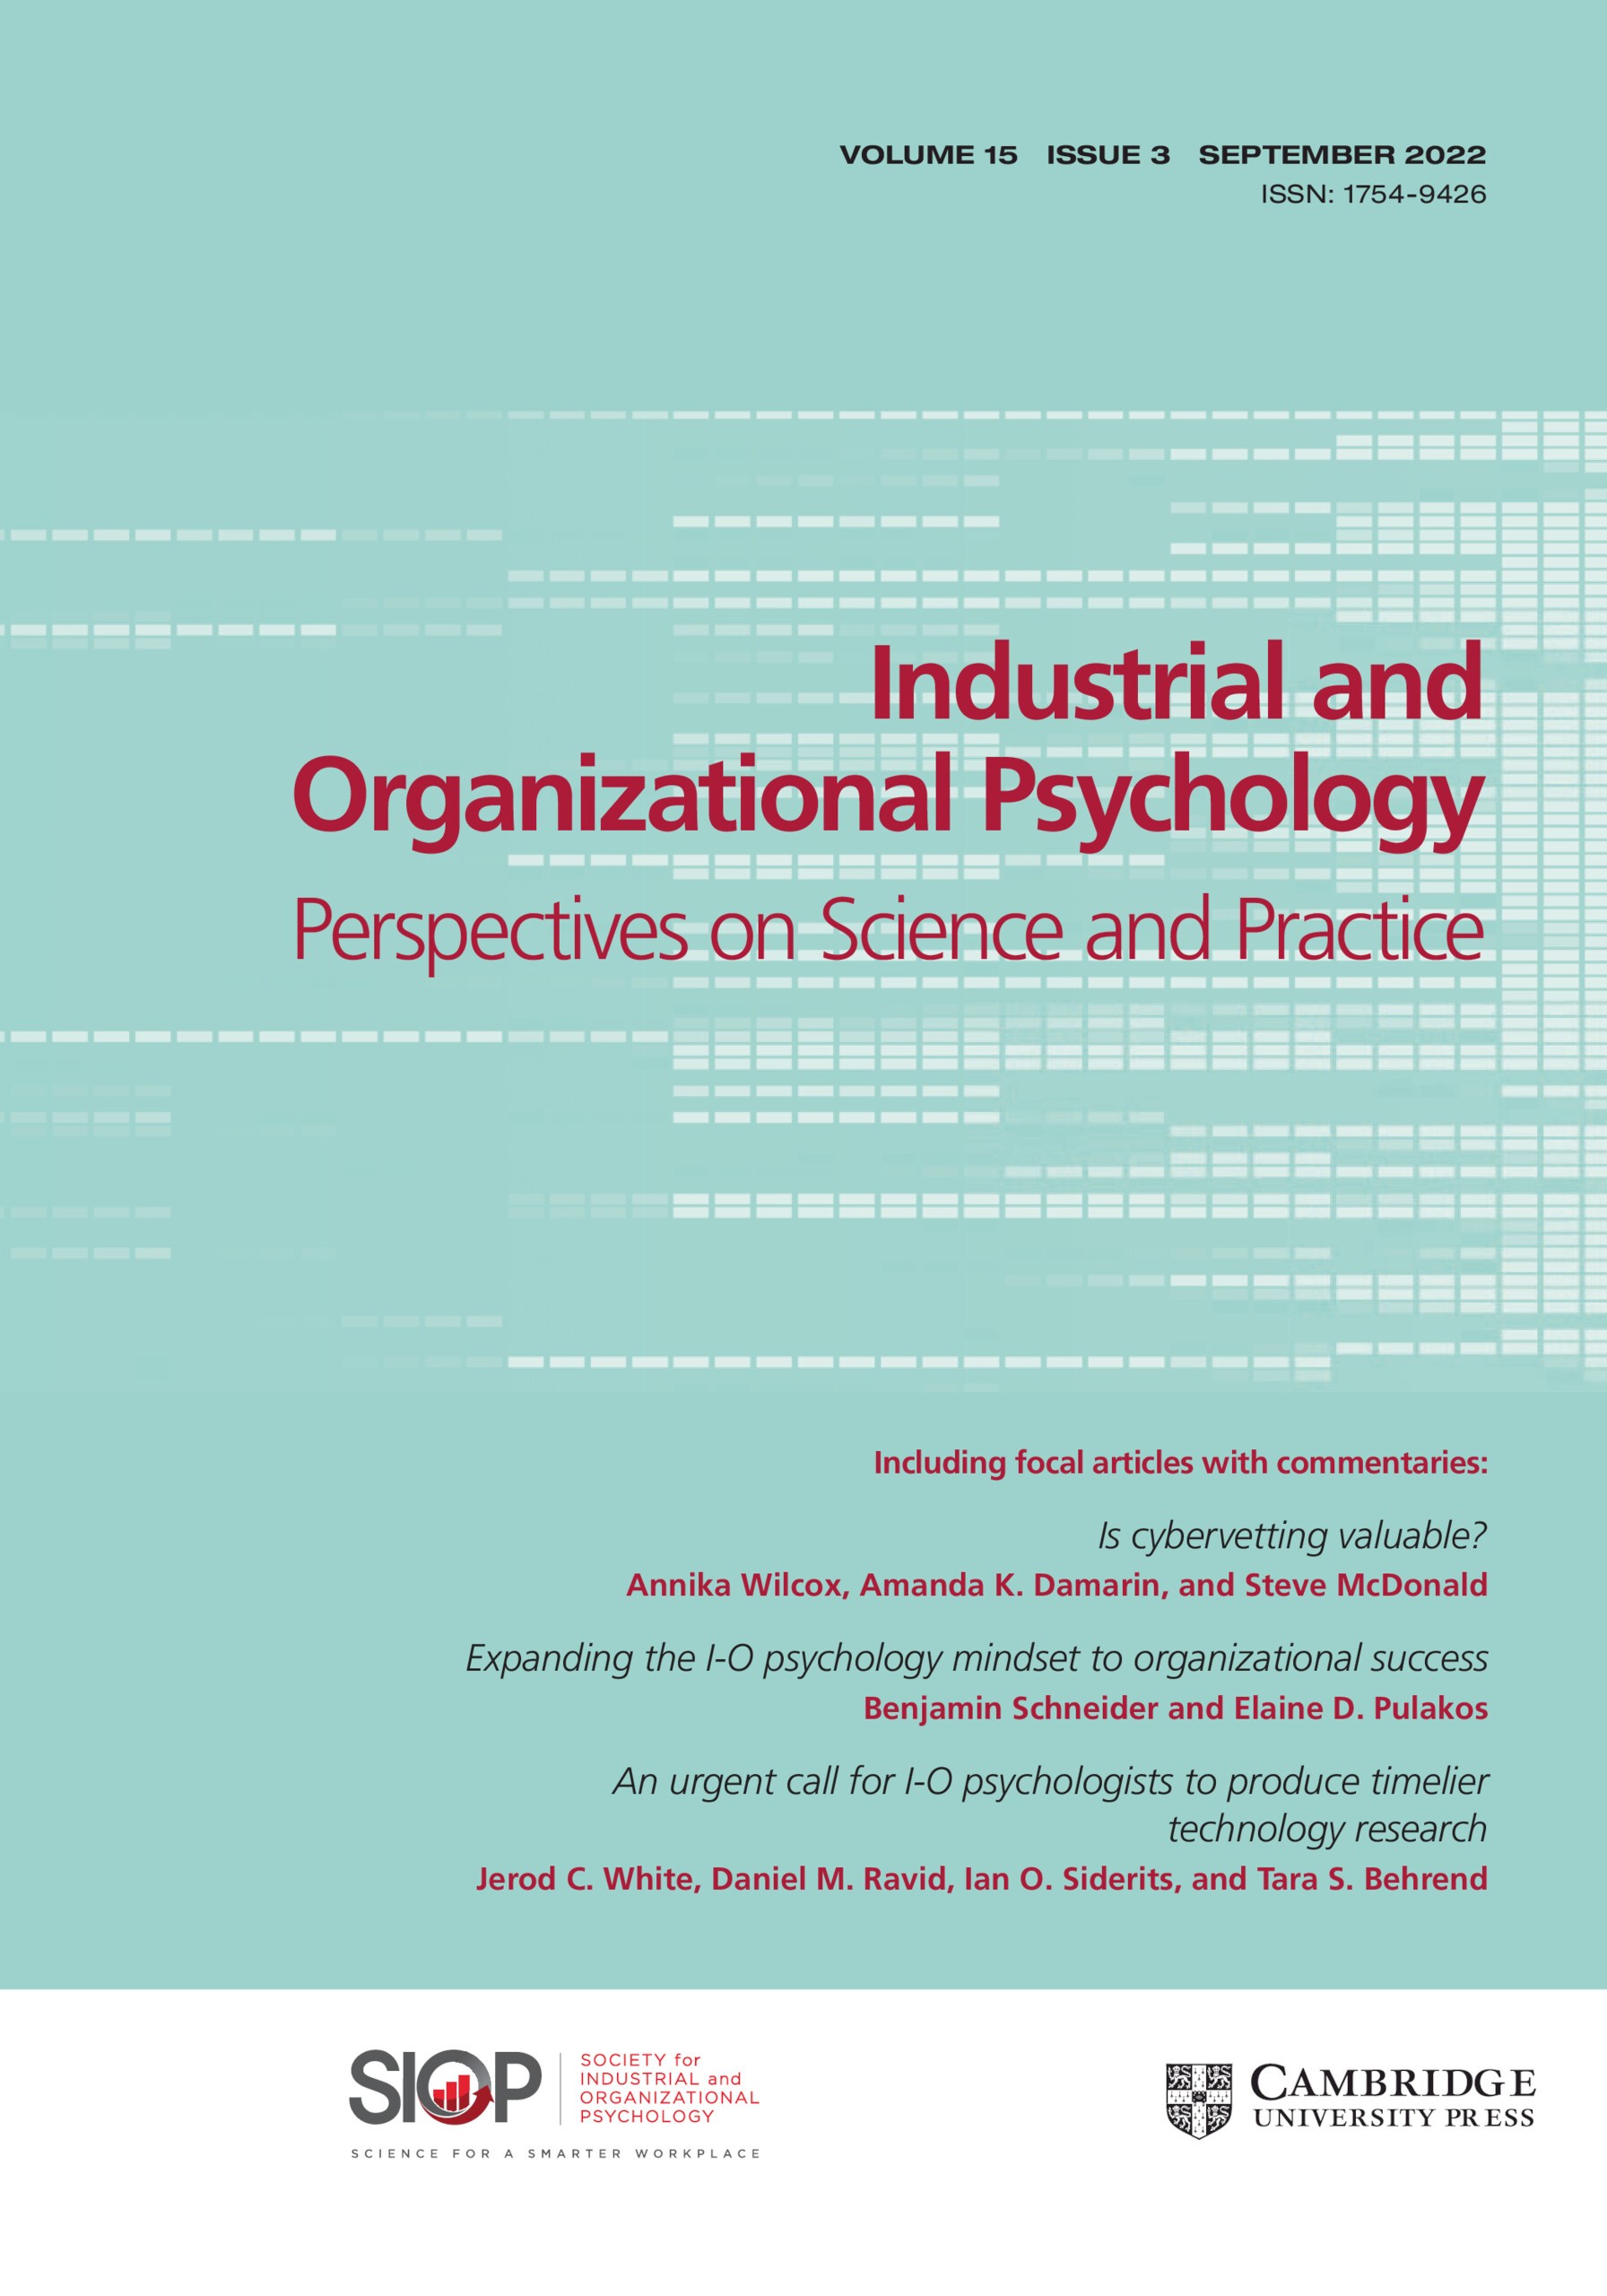 Industrial and Organizational Psychology: Perspectives on Science and Practice